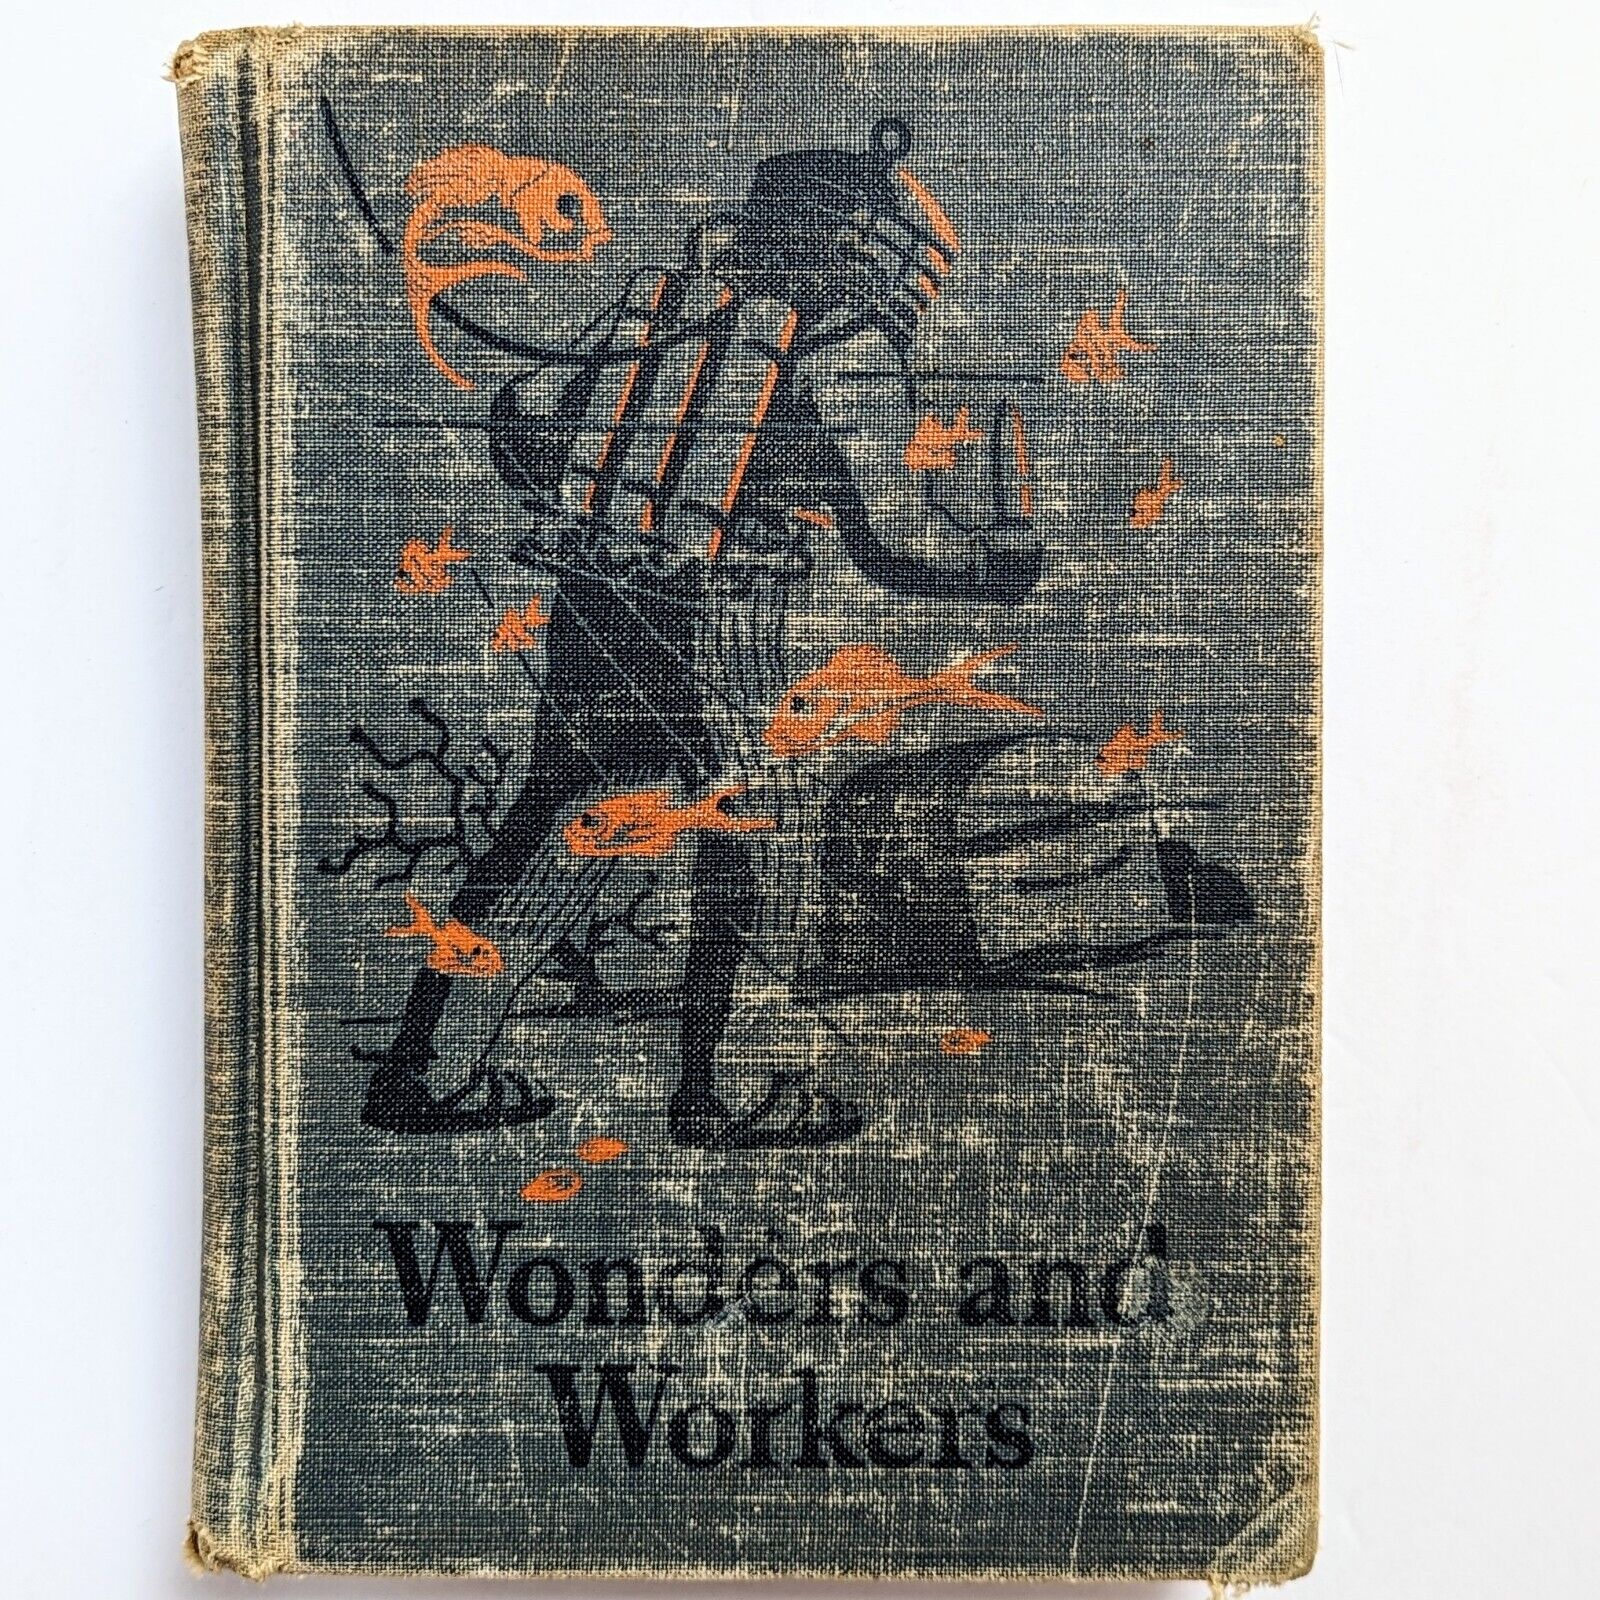 1946 Wonders And Workers Illustrated Textbook Hardcover Rare Education Gift